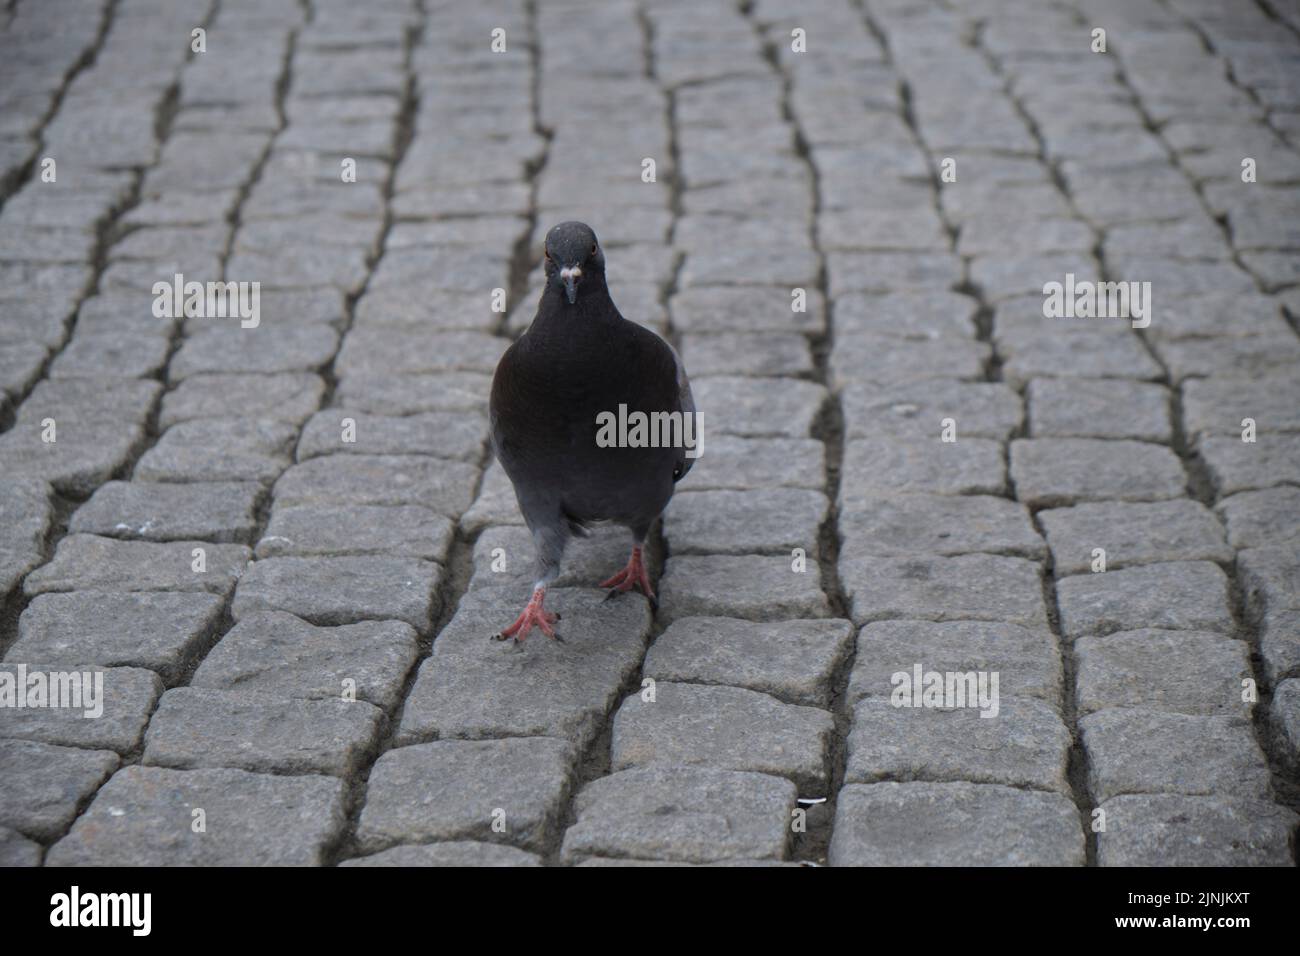 A dove going for a walk on the cobbelstone street in Kragero, Norway. Stock Photo